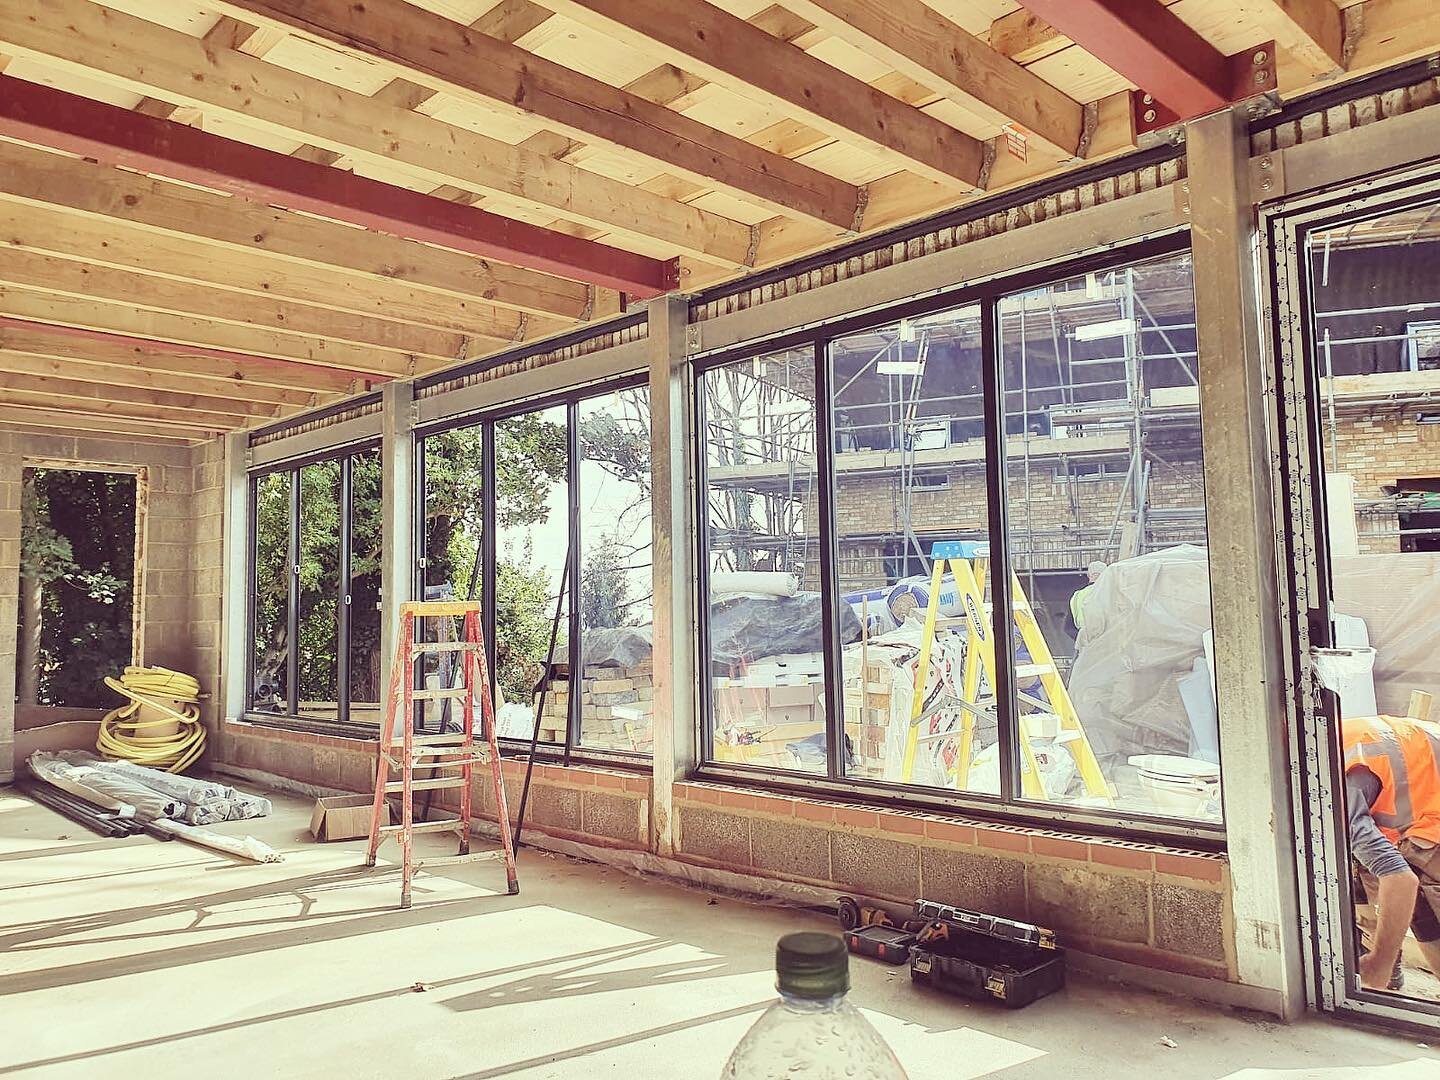 Sunny Monday back on site at Alma Place 🙌🏼

Standing inside the office looking out towards the duplexes.

_______________________________

#almaplaceproject #almaplace #crystalpalace #crystalpalacetriangle #londonproperty #southlondon #construction